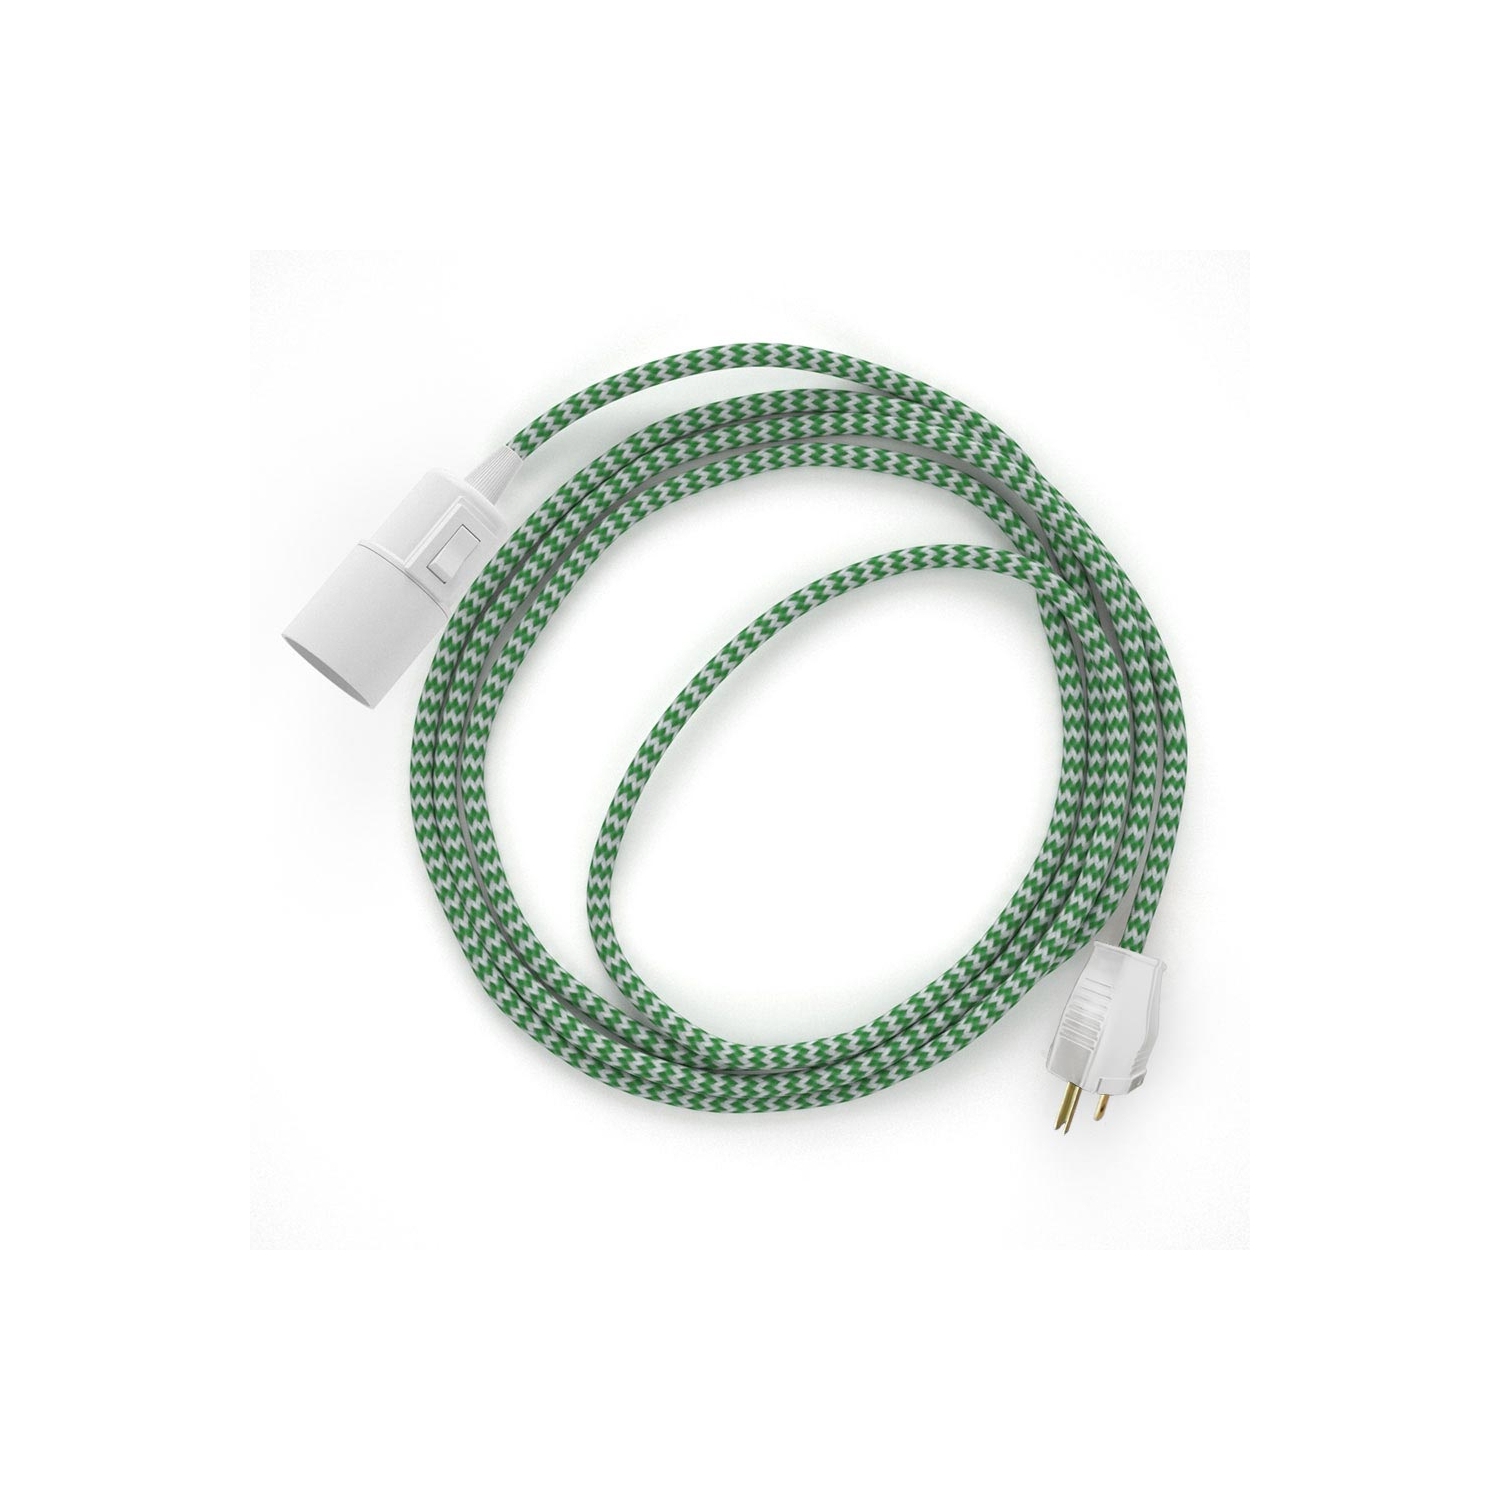 Plug-in Pendant with switch on socket | RZ06 Green & White Chevron